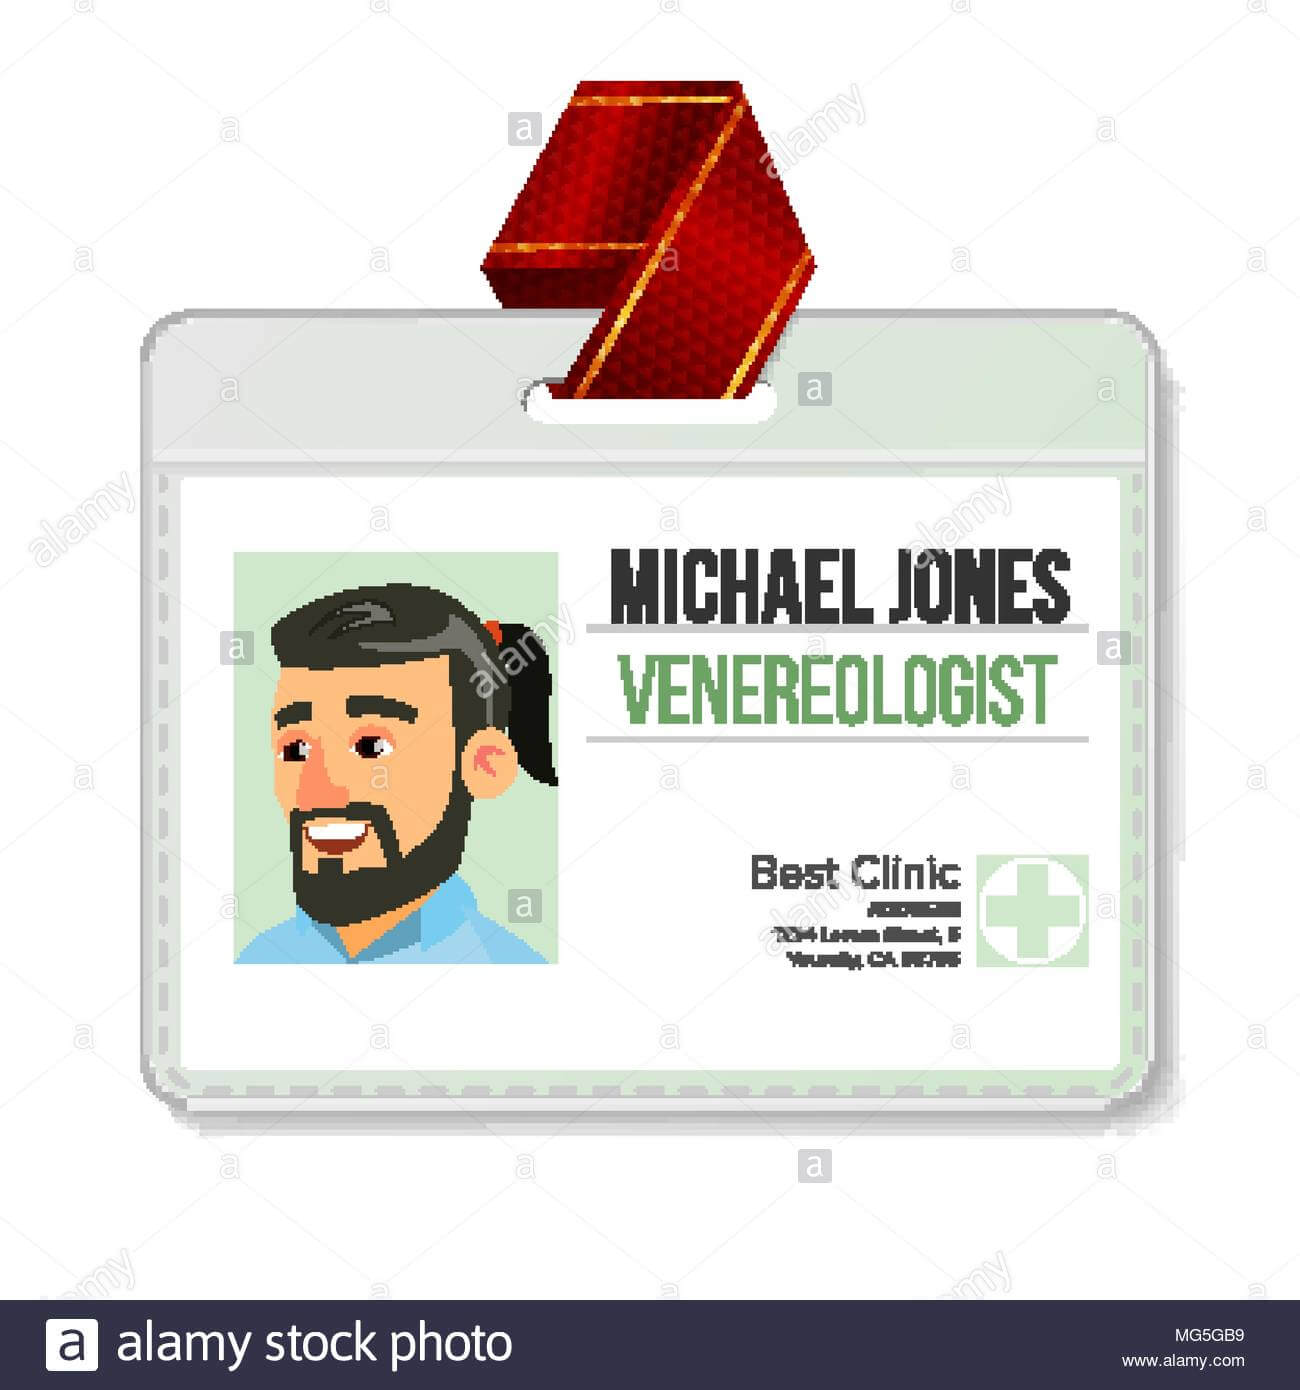 Venereologist Identification Badge Vector. Man. Id Card With Hospital Id Card Template